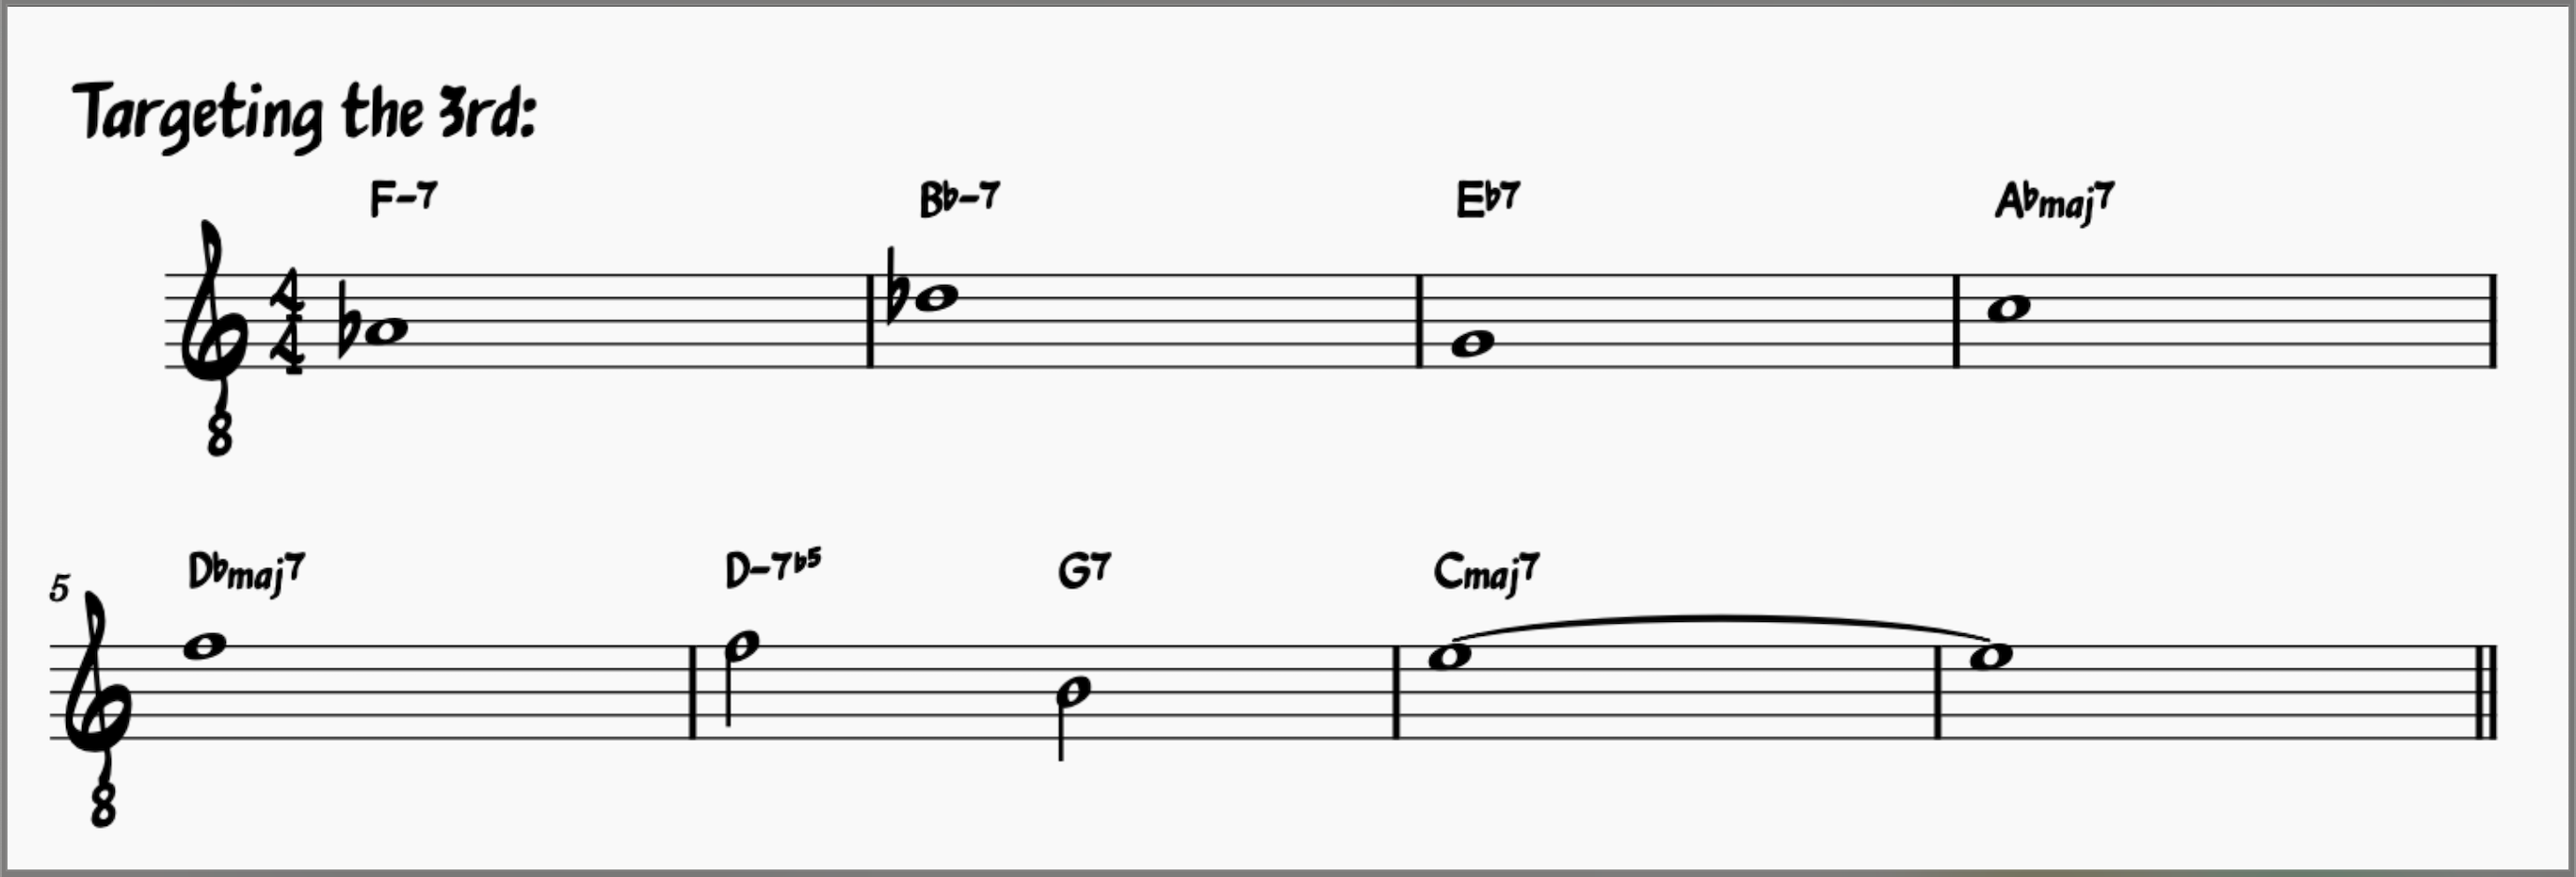 Chord Tone Exercise for All The Things You Are Targeting the 3rd